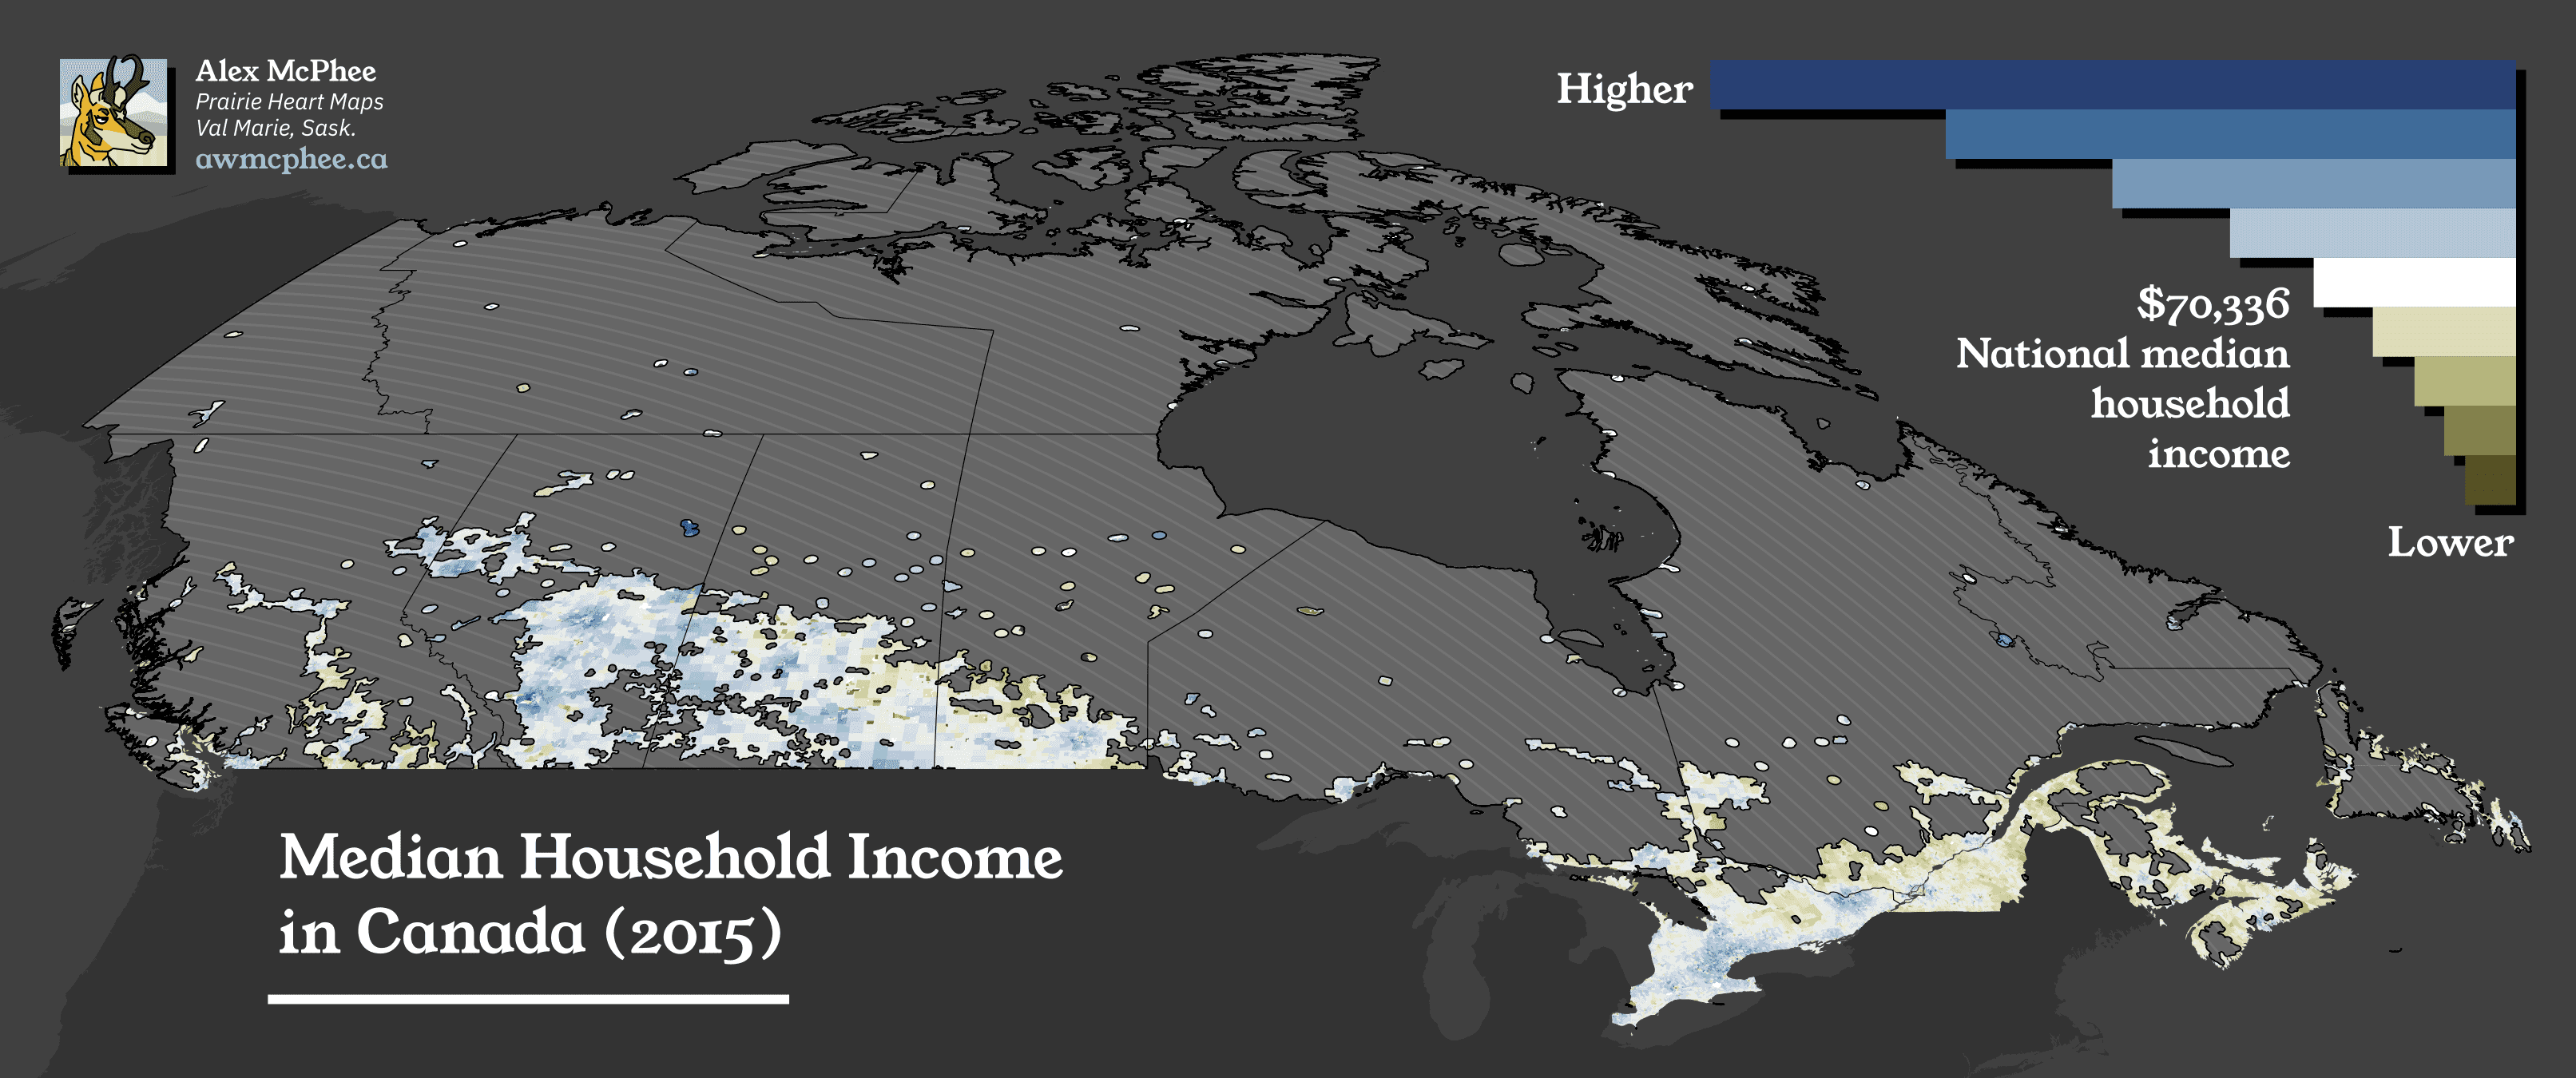 A map showing median household income in Canada.